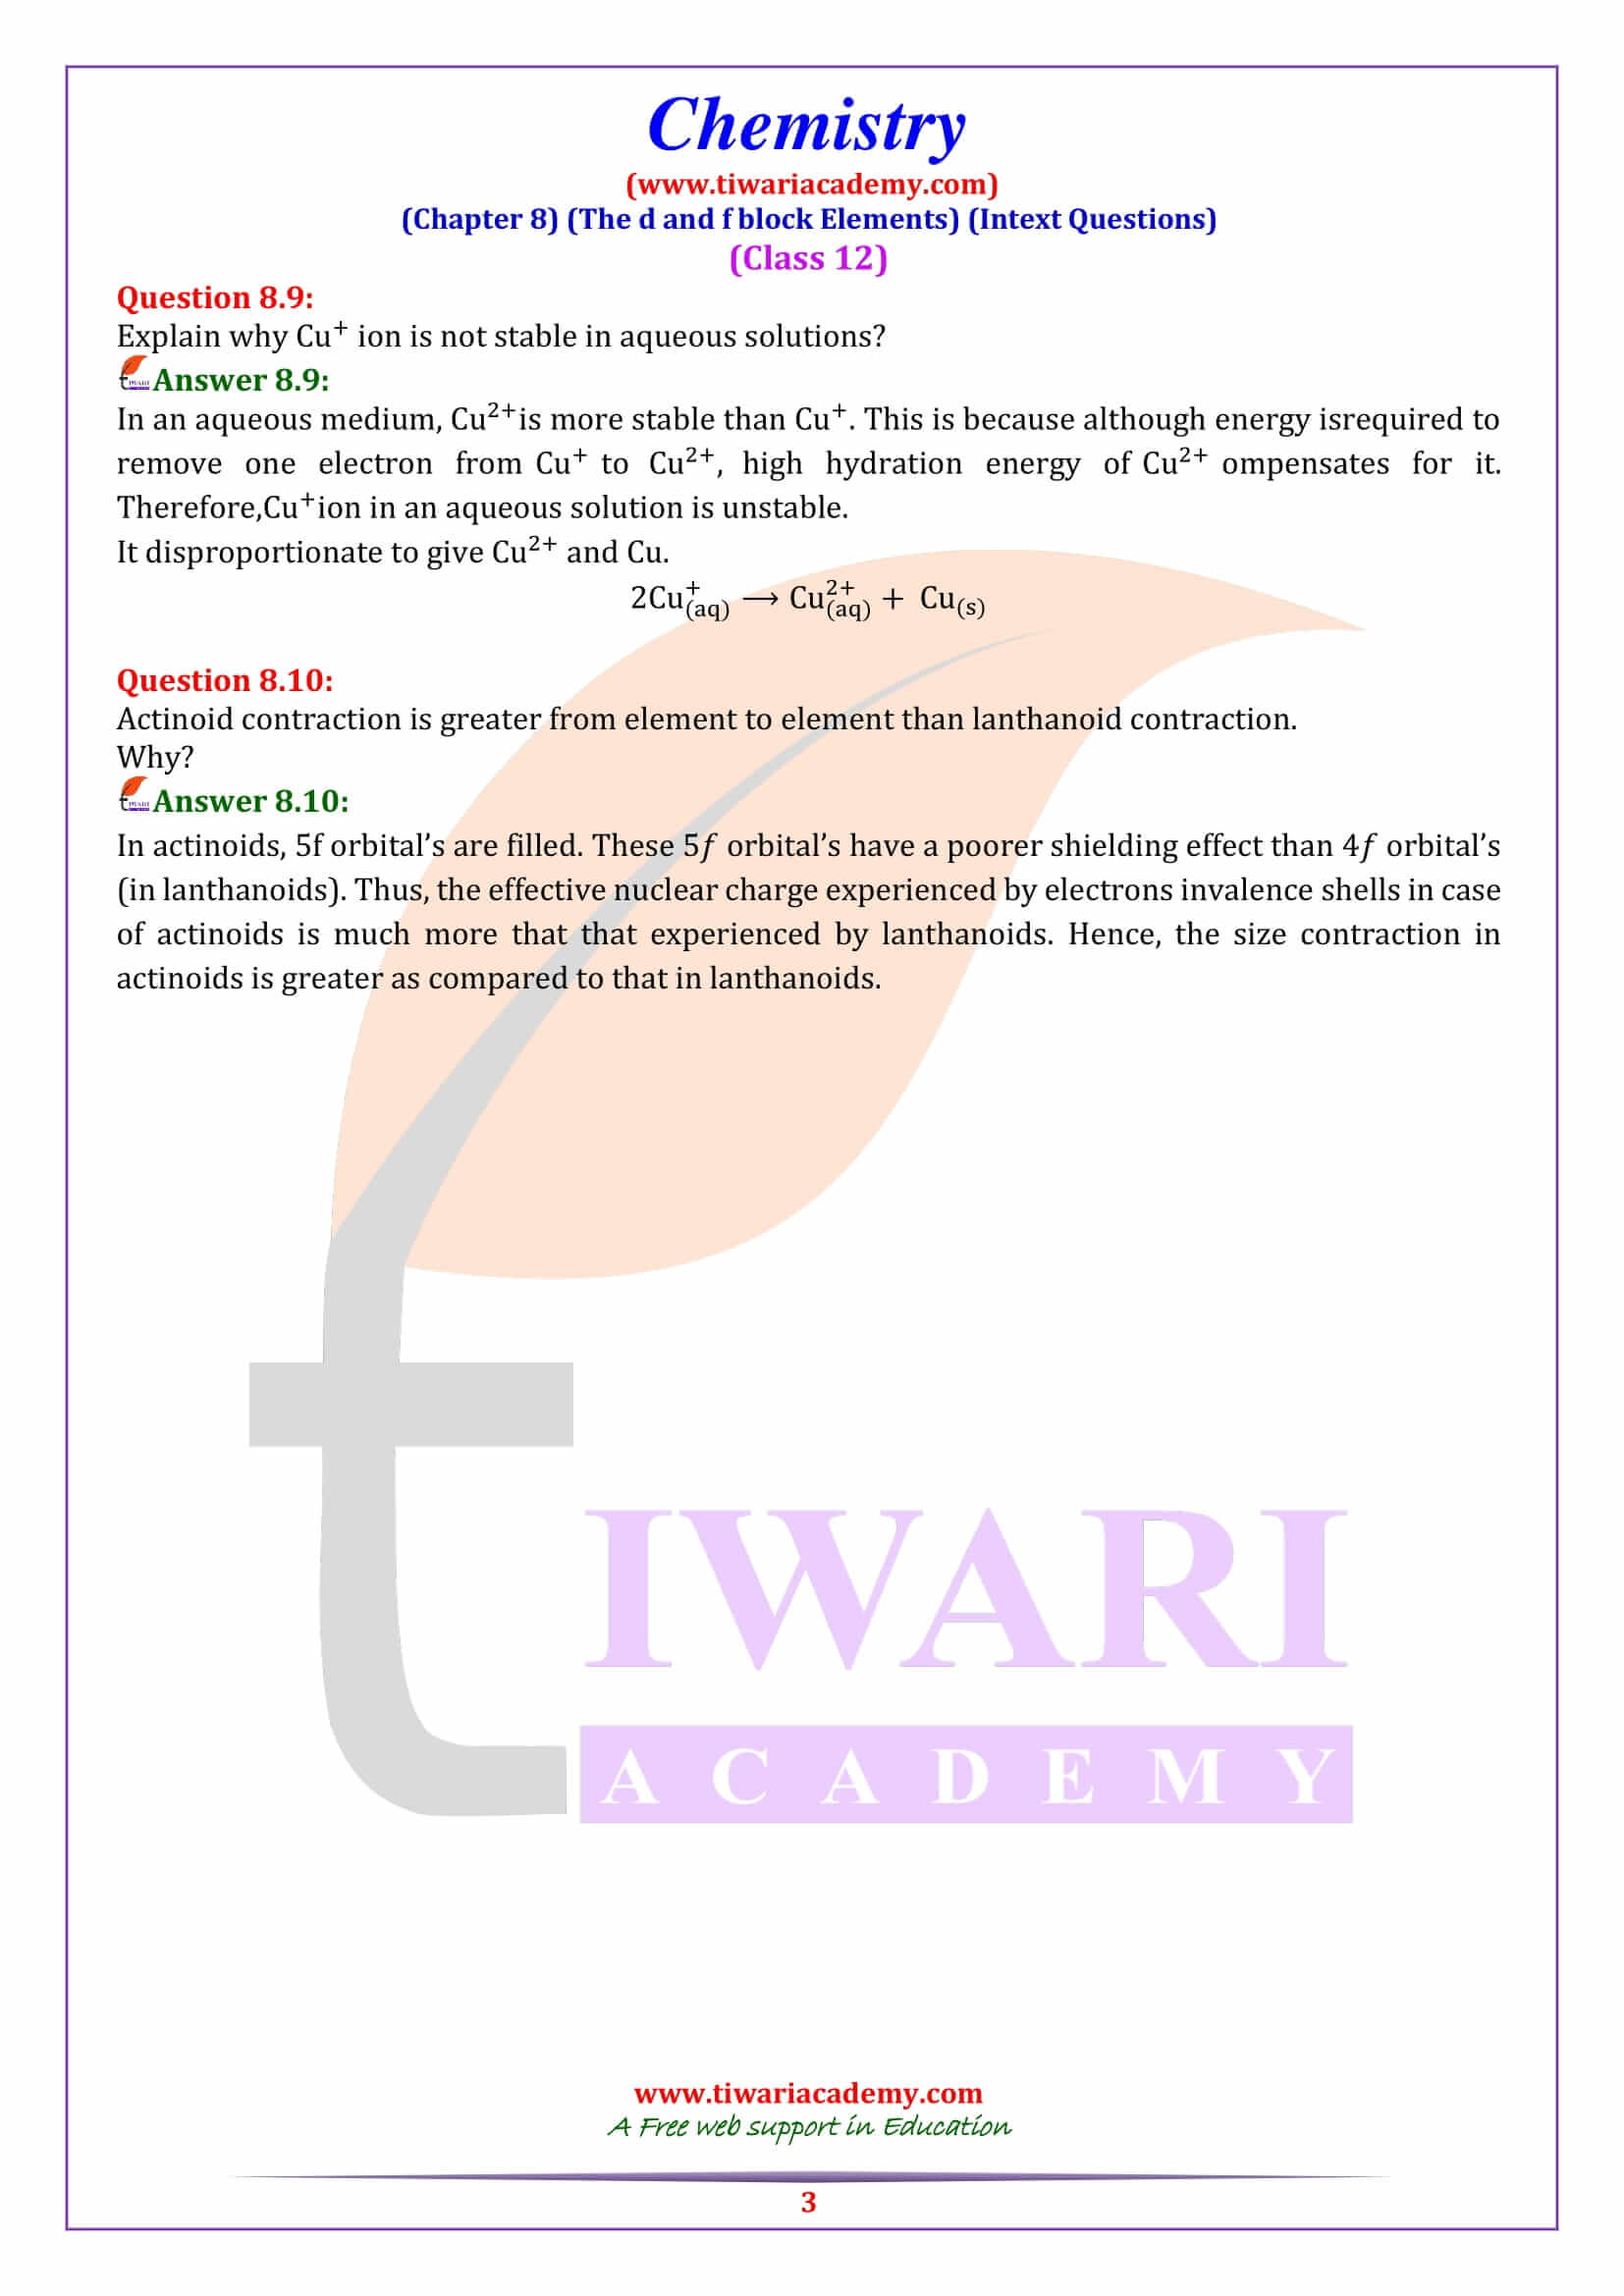 NCERT Solutions for Class 12 Chemistry Chapter 8 Intext